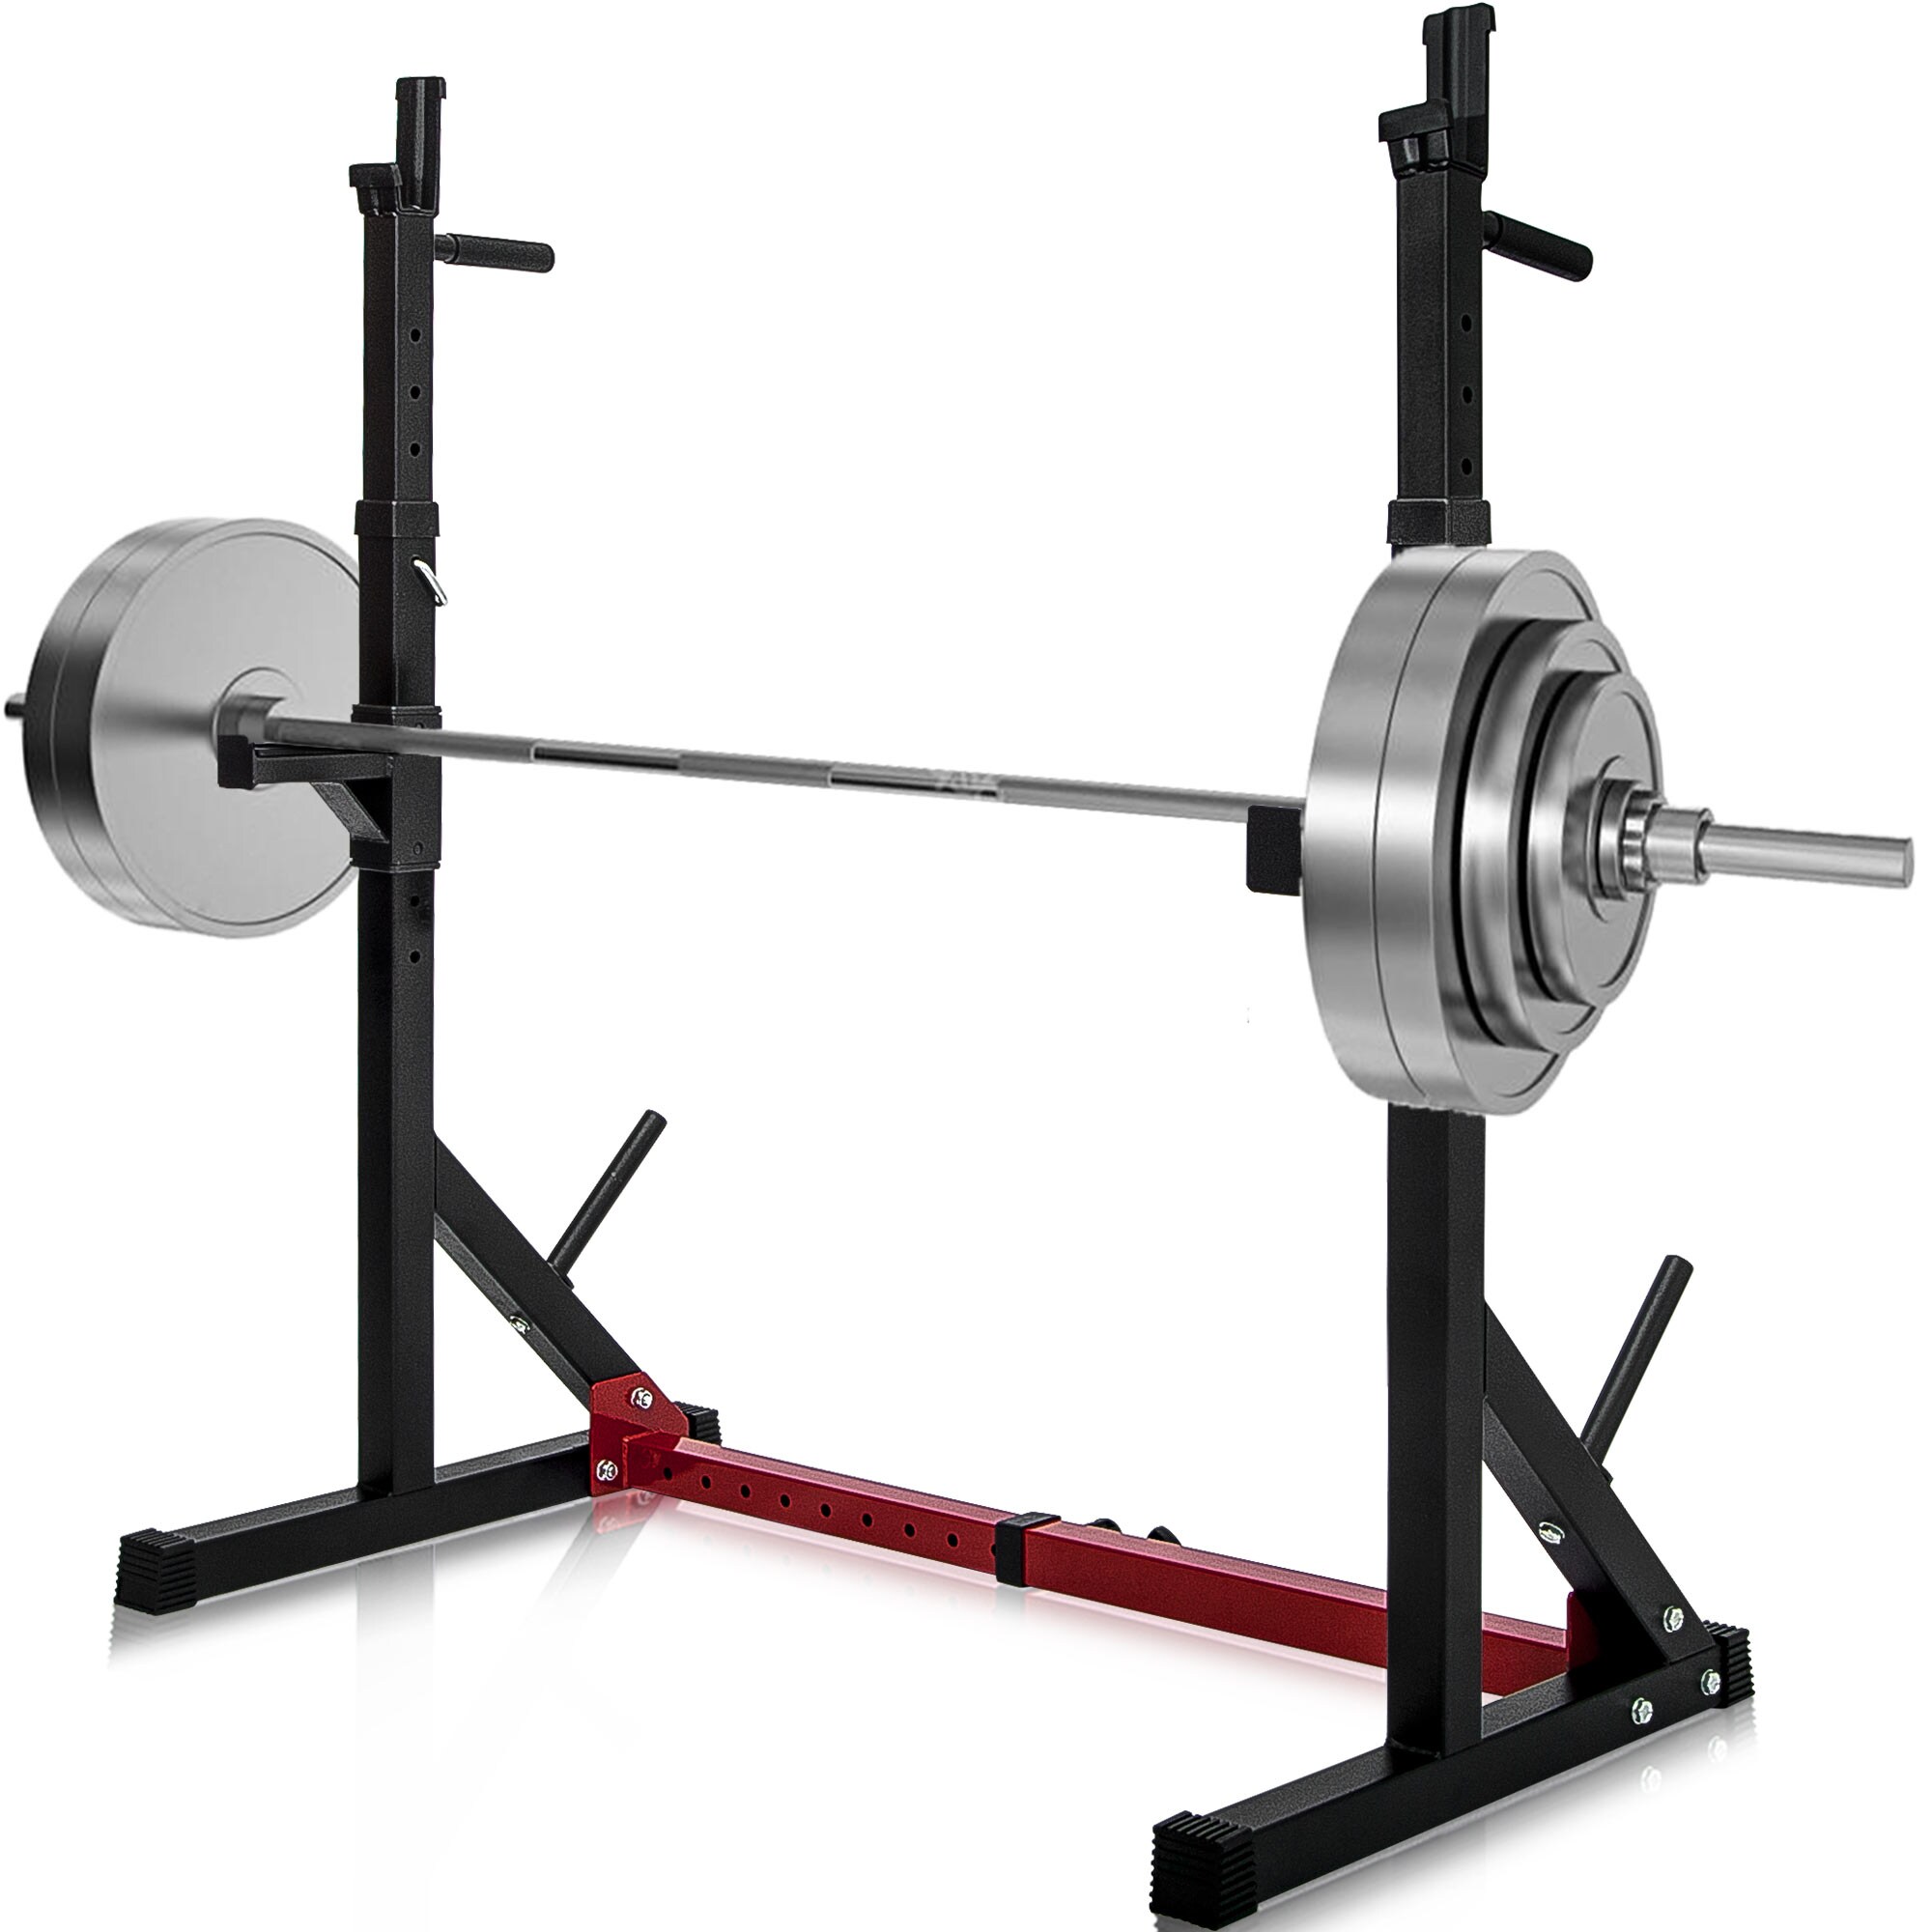 64'' Multifunctional Barbell Rack Adjustable Bench Press Rack Dip Stand for Weight Lifting 42'' PRIMEJOY Max Load 550 LBS Squat Rack Stand 